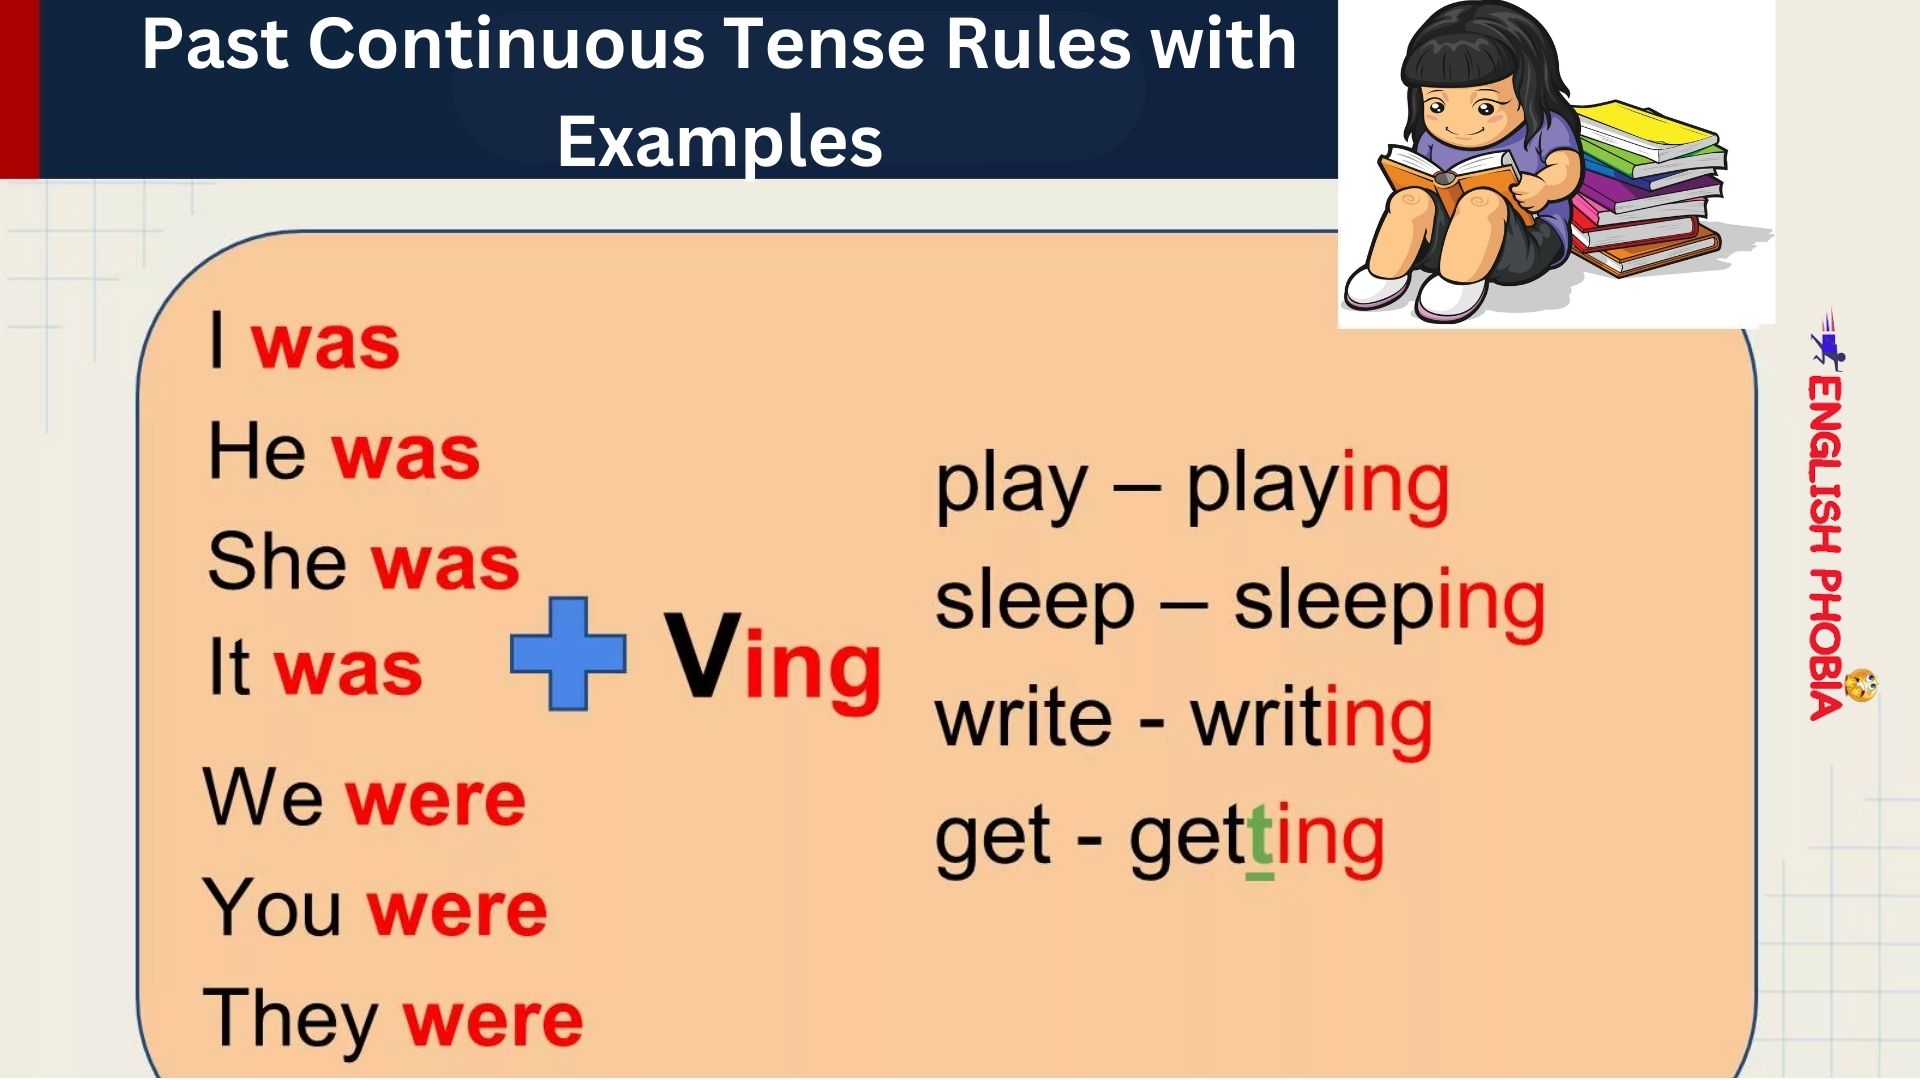 Past Continuous Tense Rules with Examples